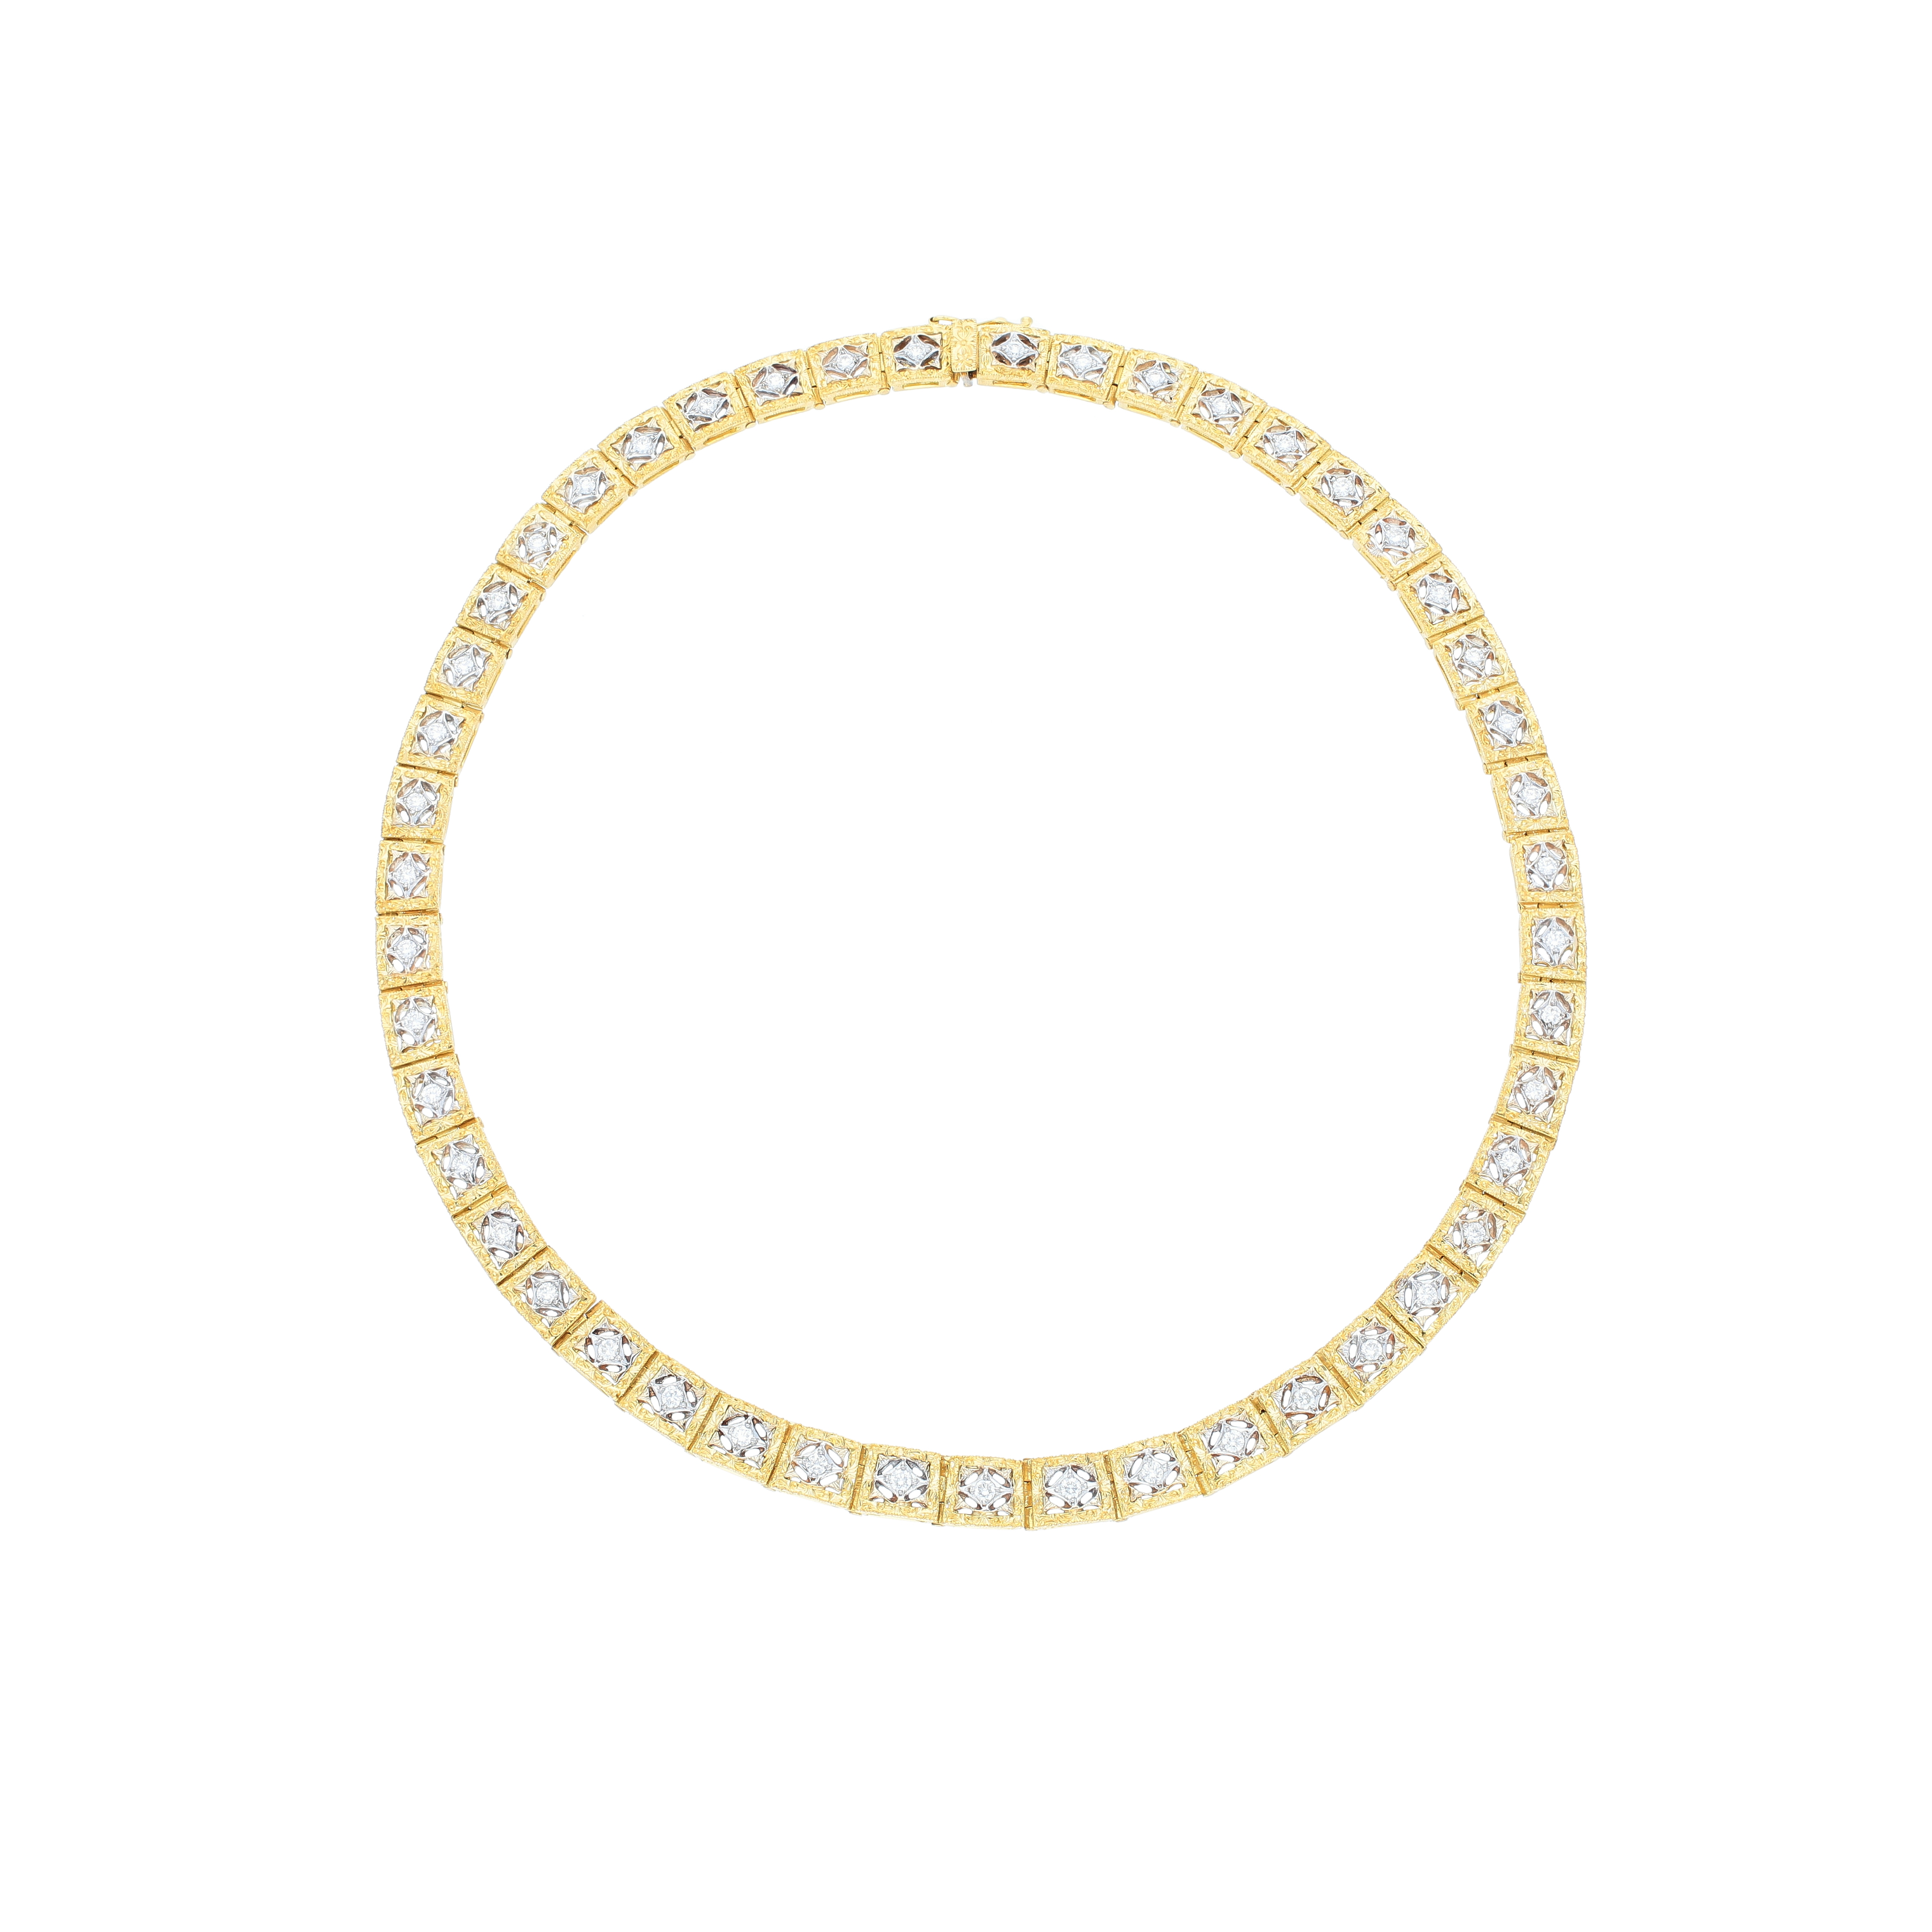 Florentine renaissance inspired necklace in 18kt gold and diamonds